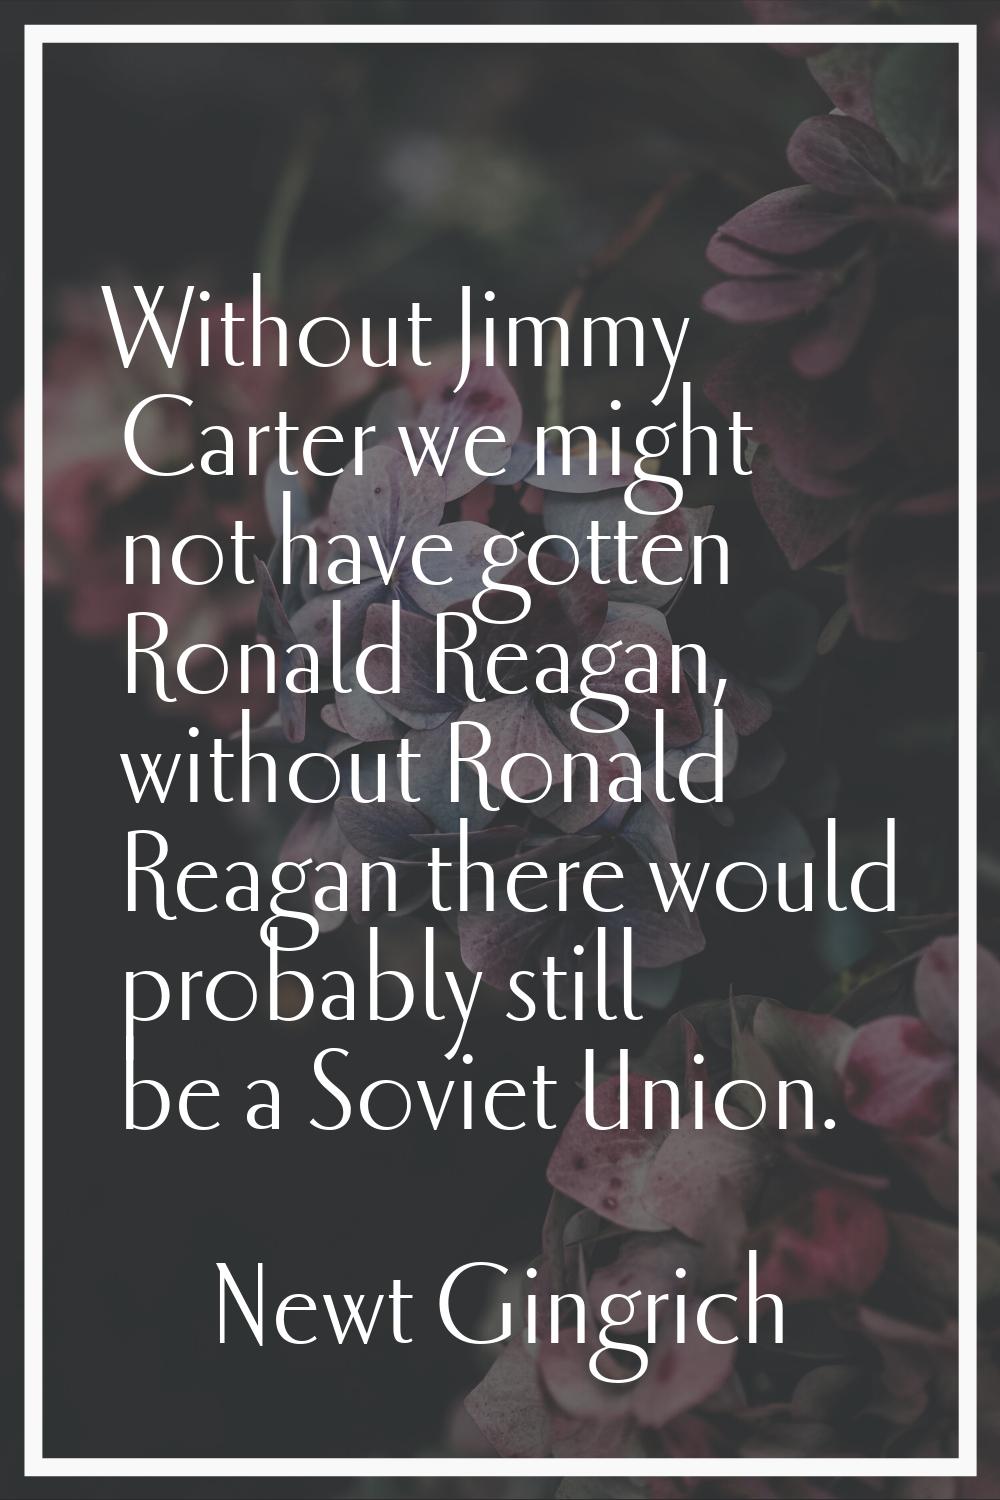 Without Jimmy Carter we might not have gotten Ronald Reagan, without Ronald Reagan there would prob